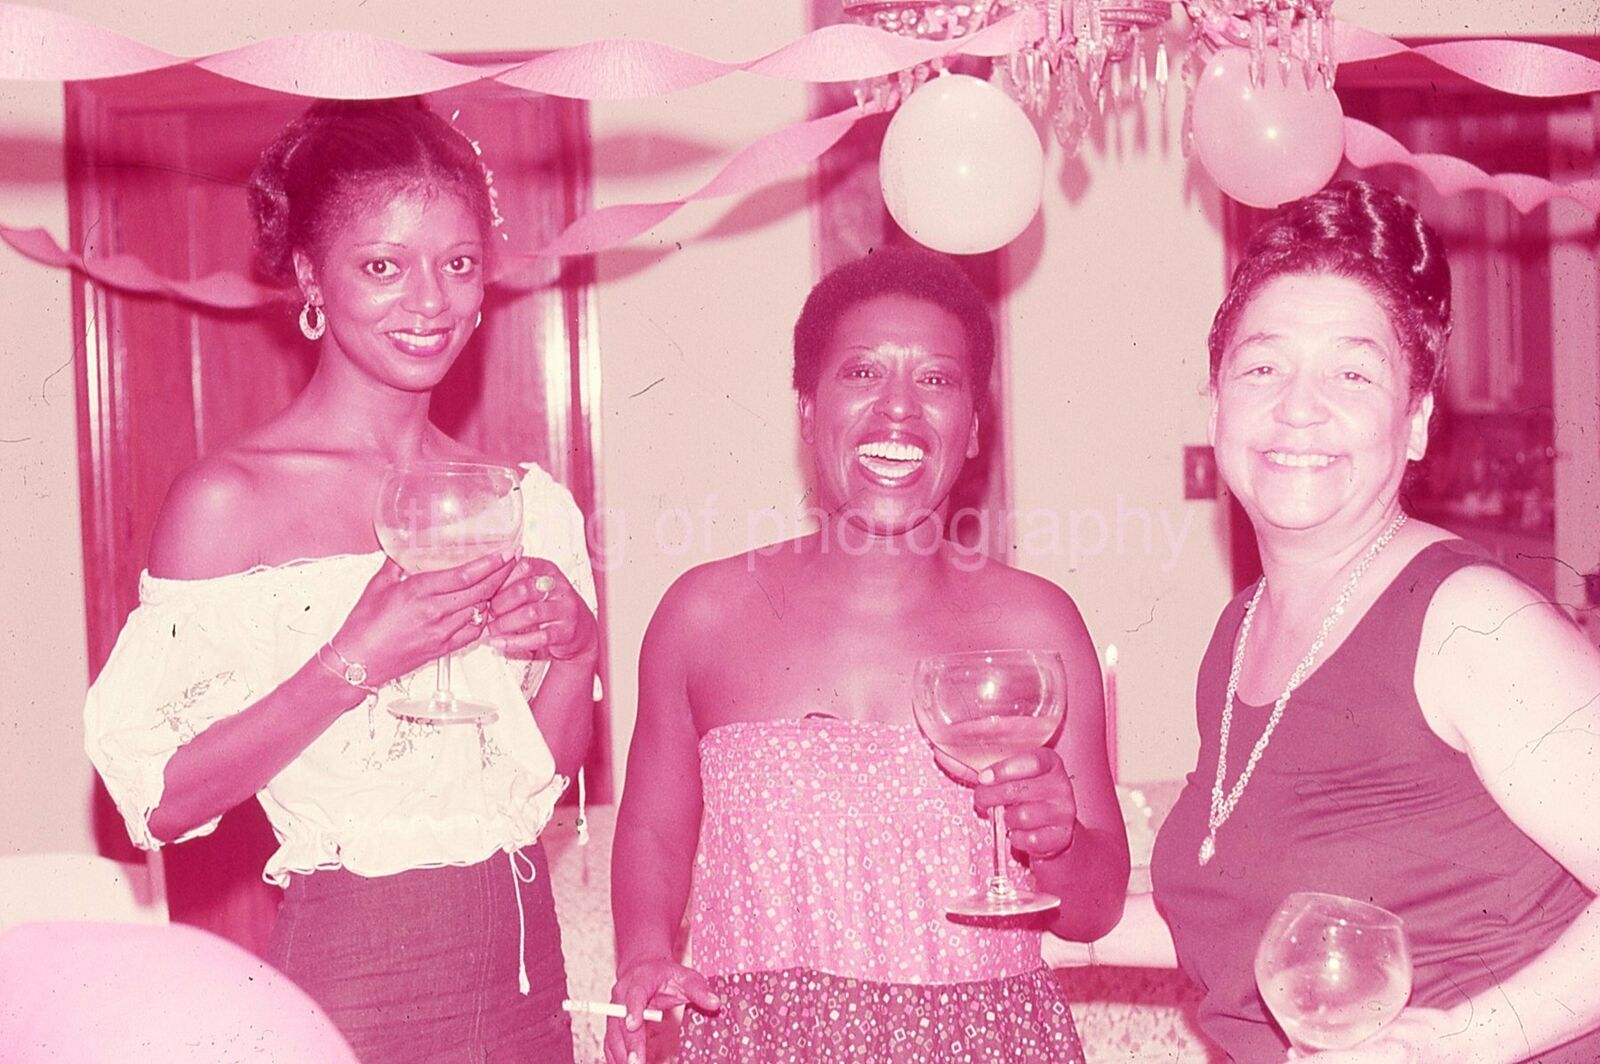 PARTY GIRLS Vintage 35mm FOUND SLIDE Transparency AMERICAN WOMEN Photo Poster painting 010 T 20